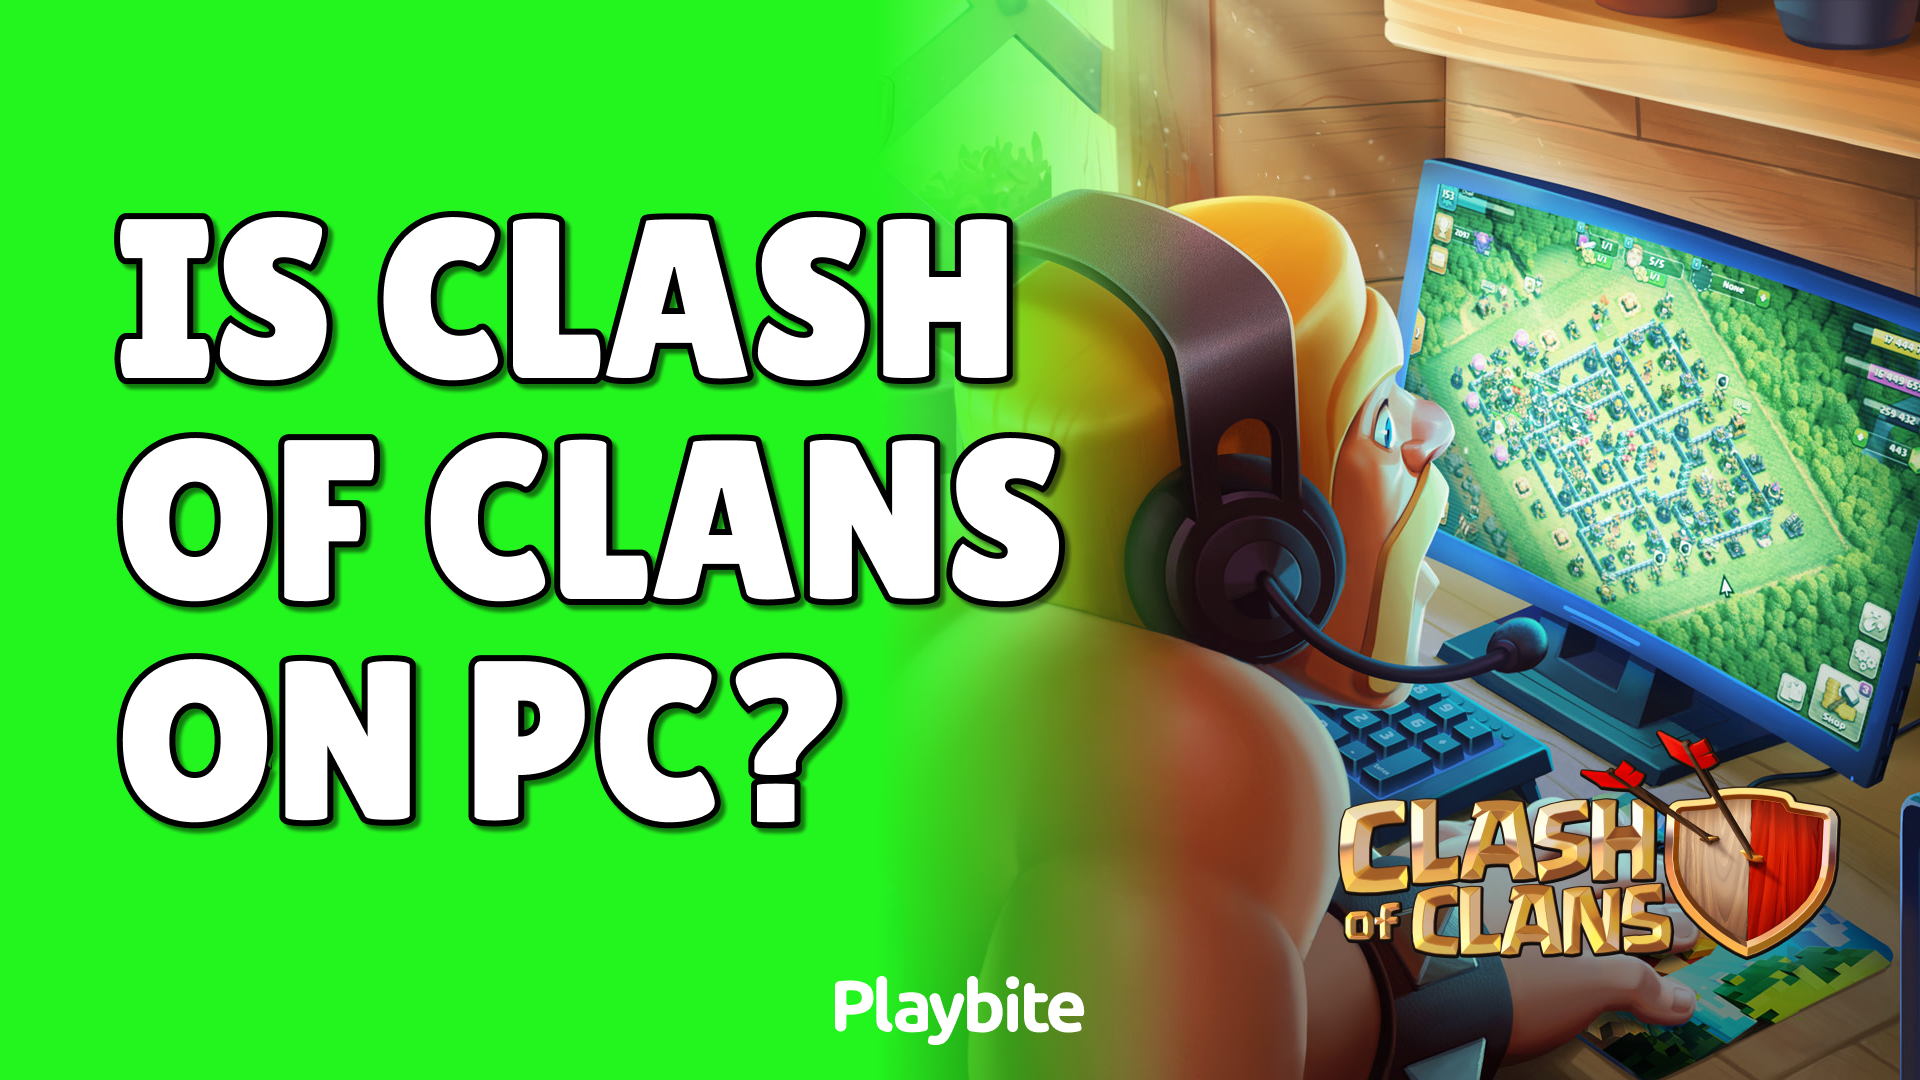 Is Clash Of Clans On PC?